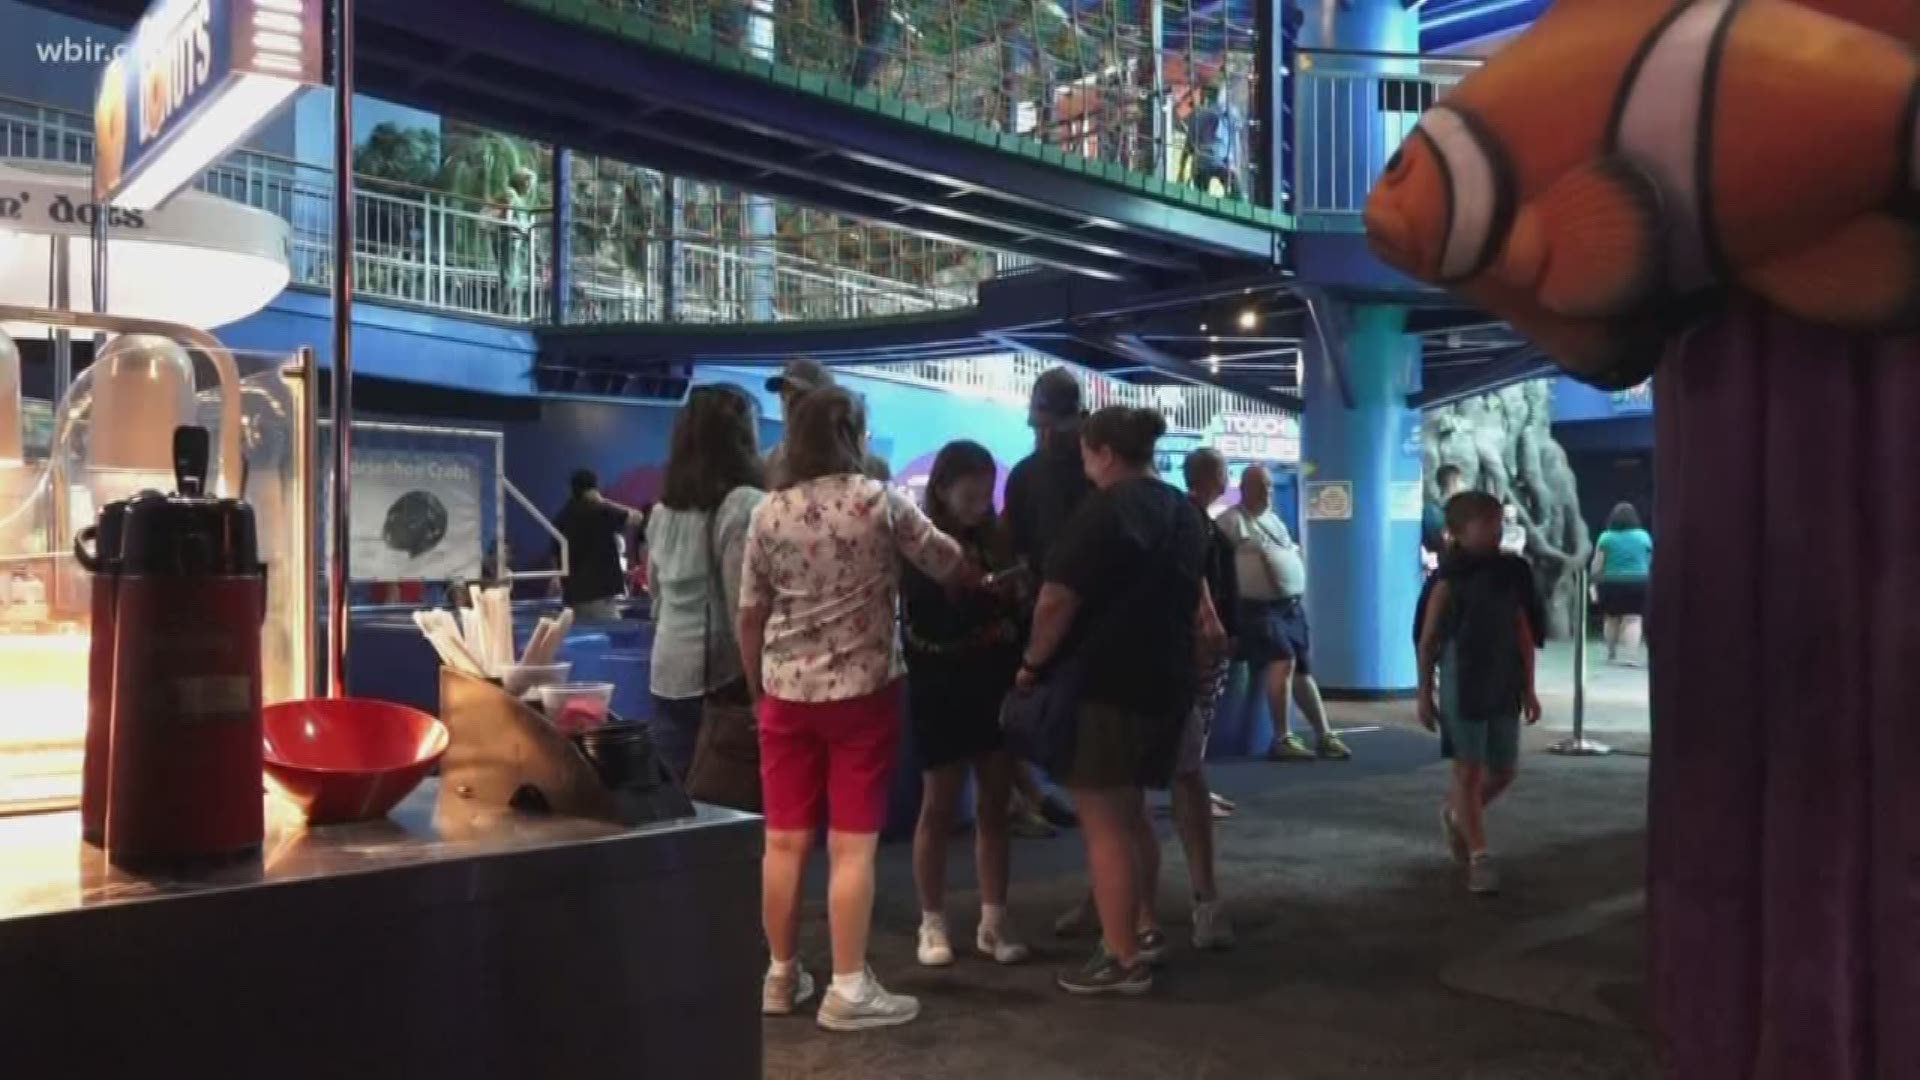 Ripleys Aquarium of the Smokies is now a Certified Autism Center, becoming e the first business in the state to earn the designation. The staff is taking extra steps to make sure all visitors enjoy their visit including noise-cancellation headphones and quiet rooms and benches away from the main walkway that offer a dark, soothing space.  o June 25, 2019-4pm.